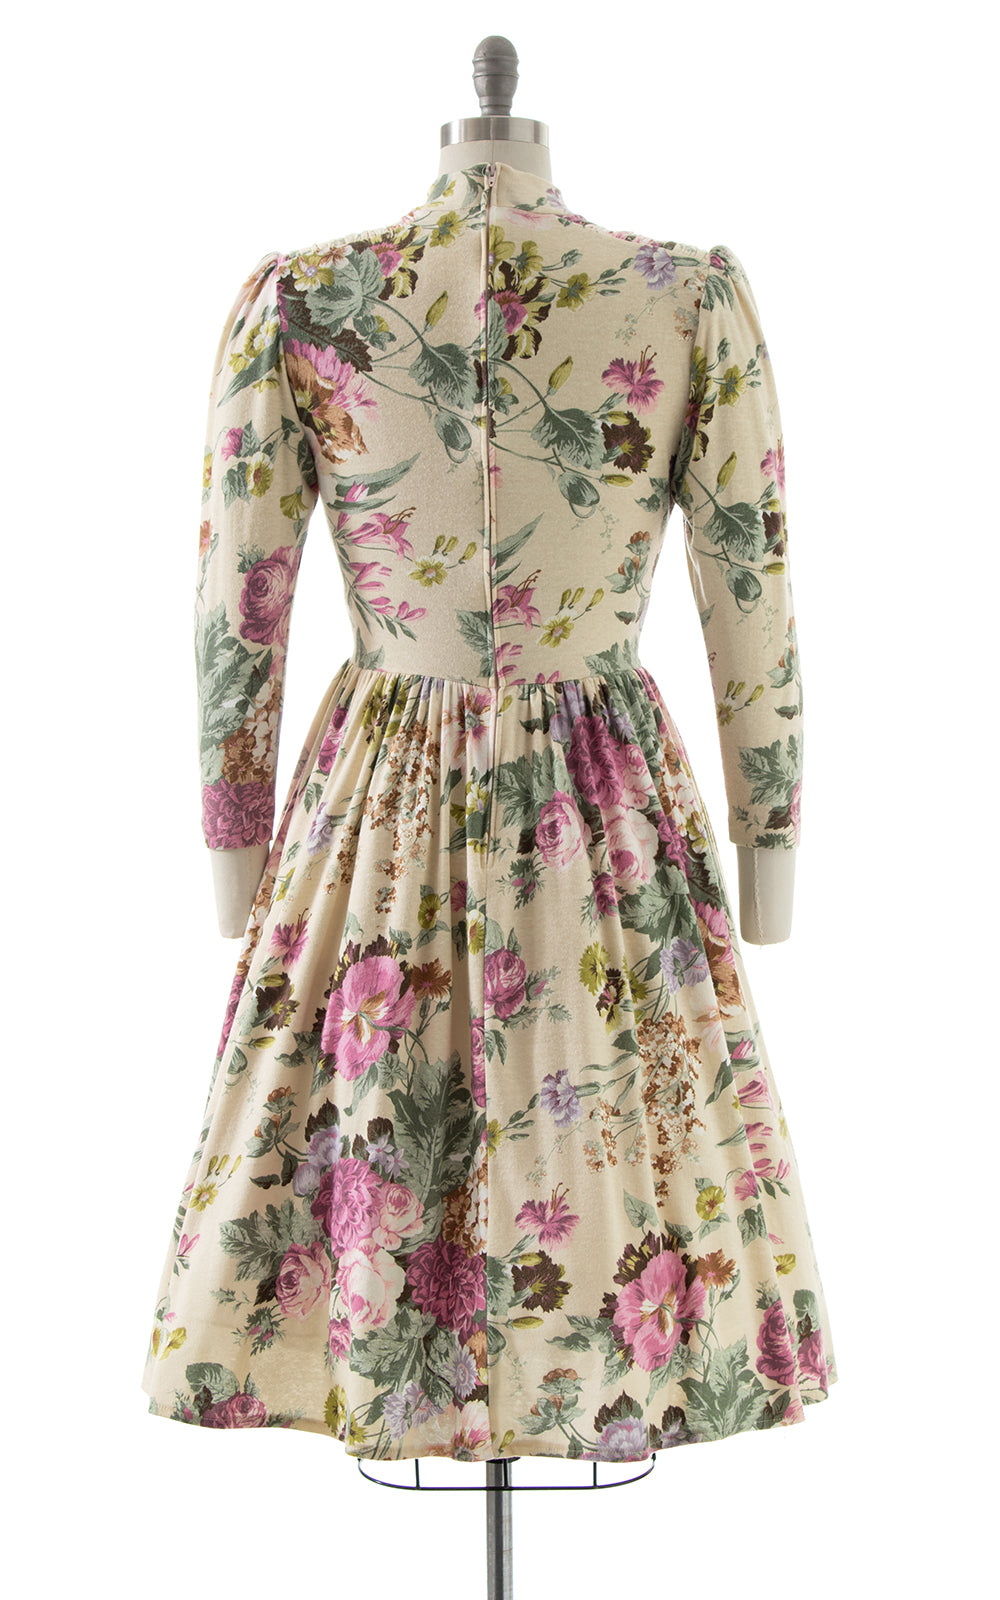 1980s 1990s Floral Cotton Jersey Dress with Pockets | small